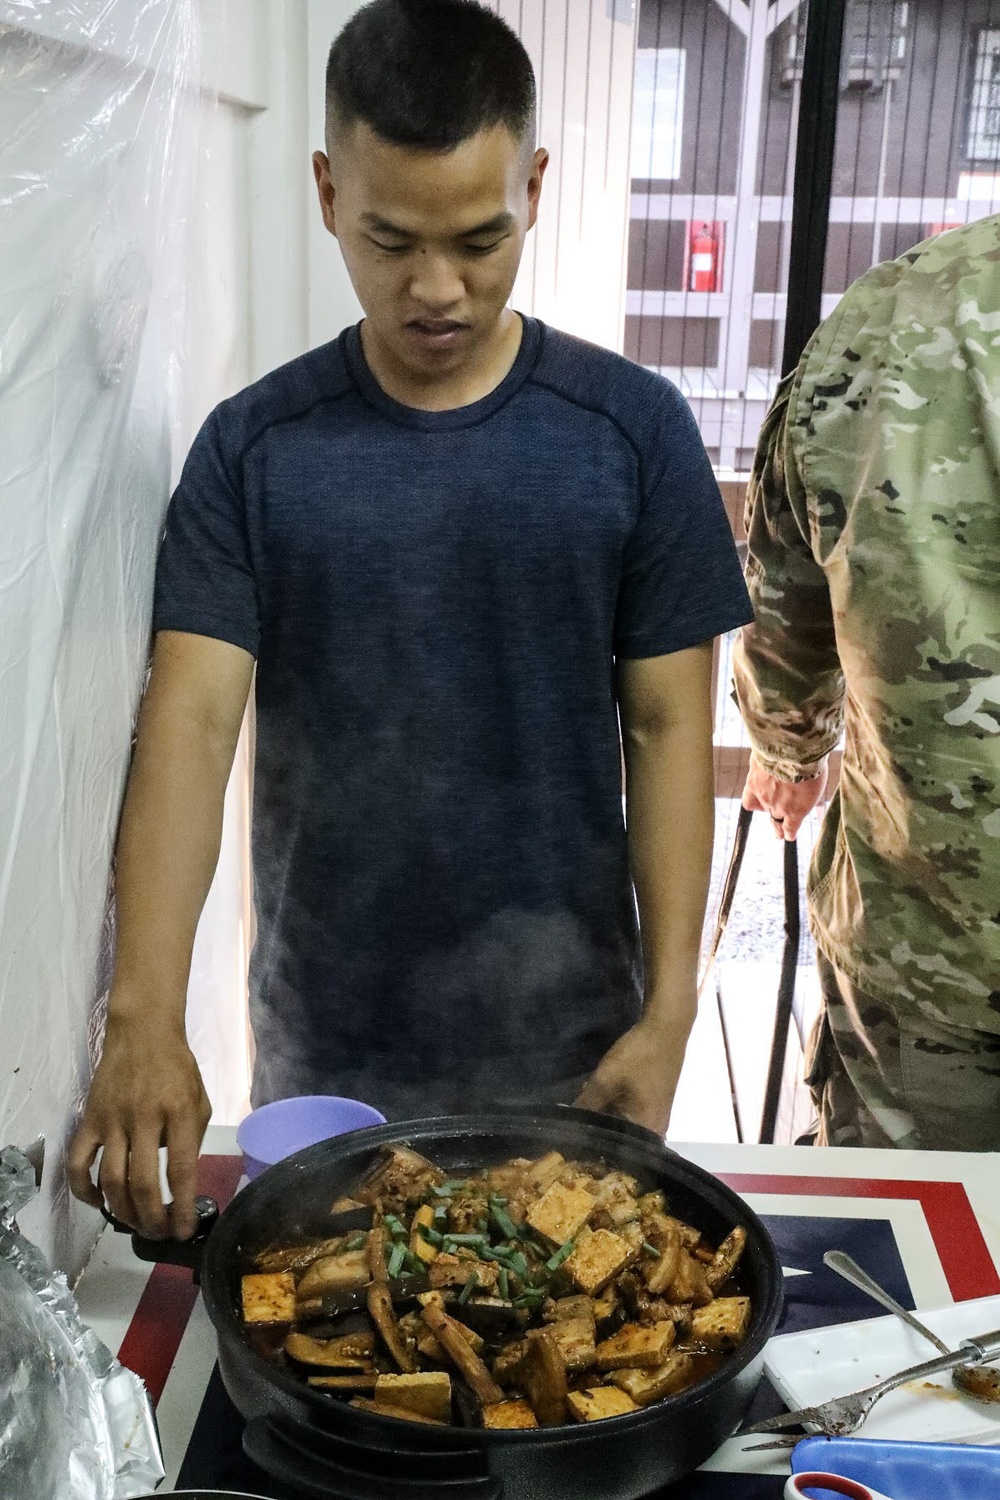 Garden to table; Soldier channels resiliency through cooking